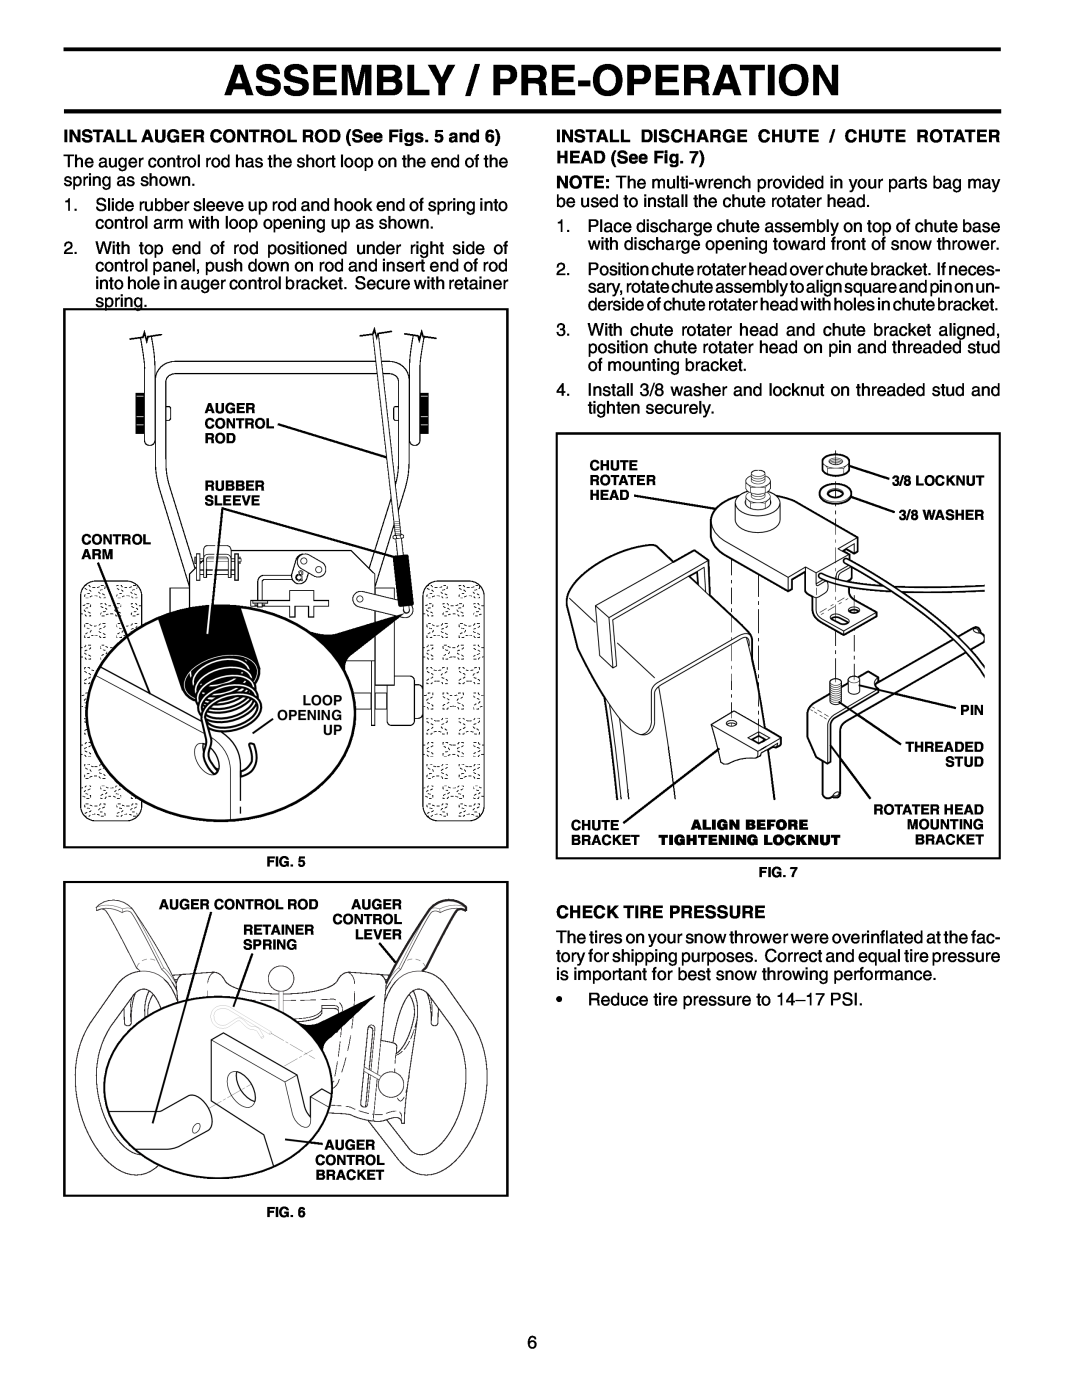 Poulan 96192000301, 401214 Assembly / Pre-Operation, INSTALL AUGER CONTROL ROD See Figs. 5 and, Check Tire Pressure 